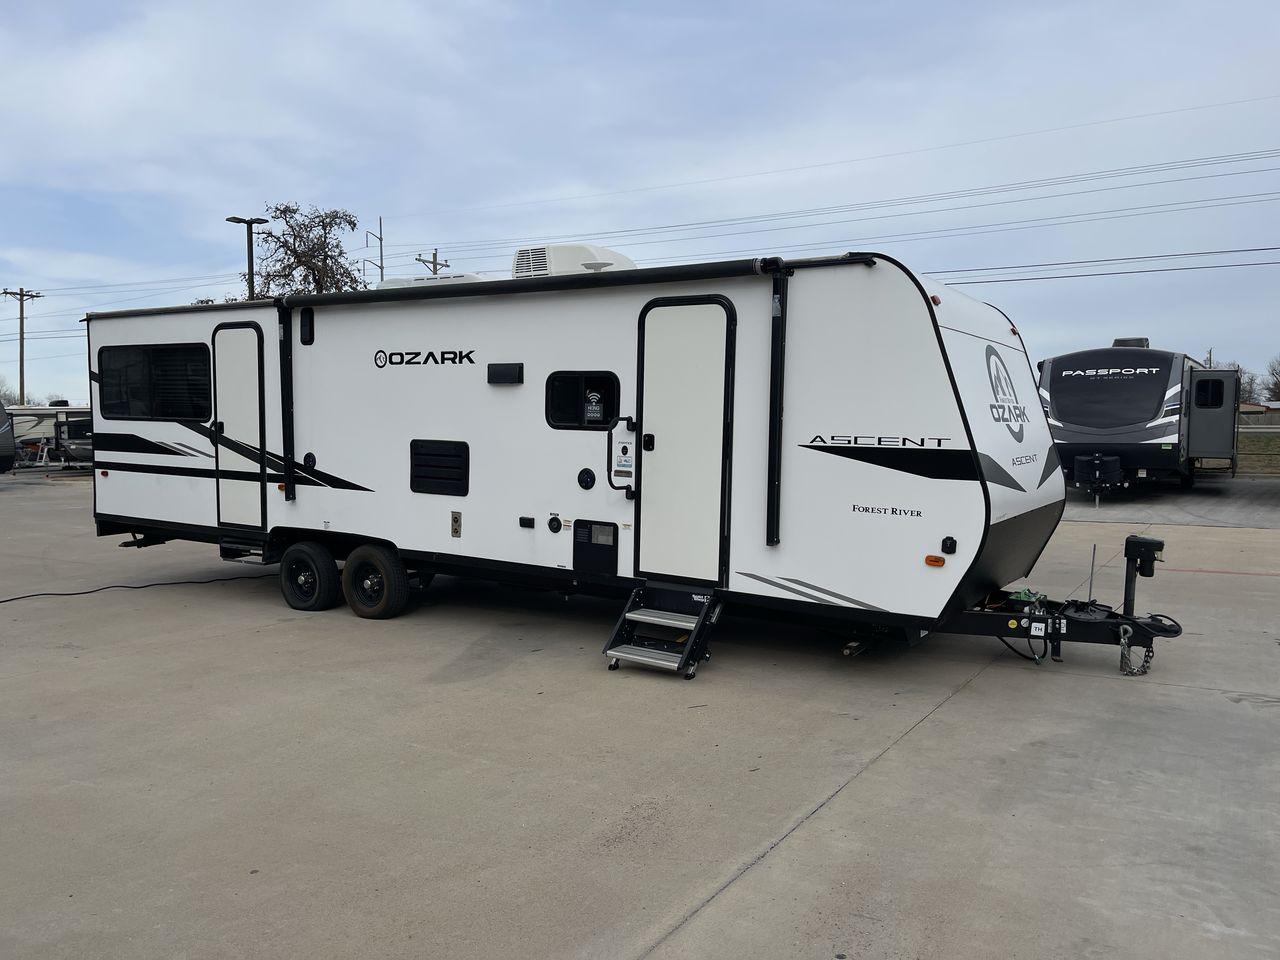 2021 FOREST RIVER OZARK 2700THX (5ZT2ZKSB7MG) , Length: 32.33 ft. | Dry Weight: 5,683 lbs. | Gross Weight: 7,830 lbs. | Slides: 1 transmission, located at 4319 N Main St, Cleburne, TX, 76033, (817) 678-5133, 32.385960, -97.391212 - Measuring ~32 feet in length, this RV combines compactness with functionality, making it an ideal choice for both weekend getaways and extended road trips. The Ozark 2700THX features a features a single slide-out, providing a well-designed and spacious interior. The 2700THX boasts a dedicated garage - Photo #19